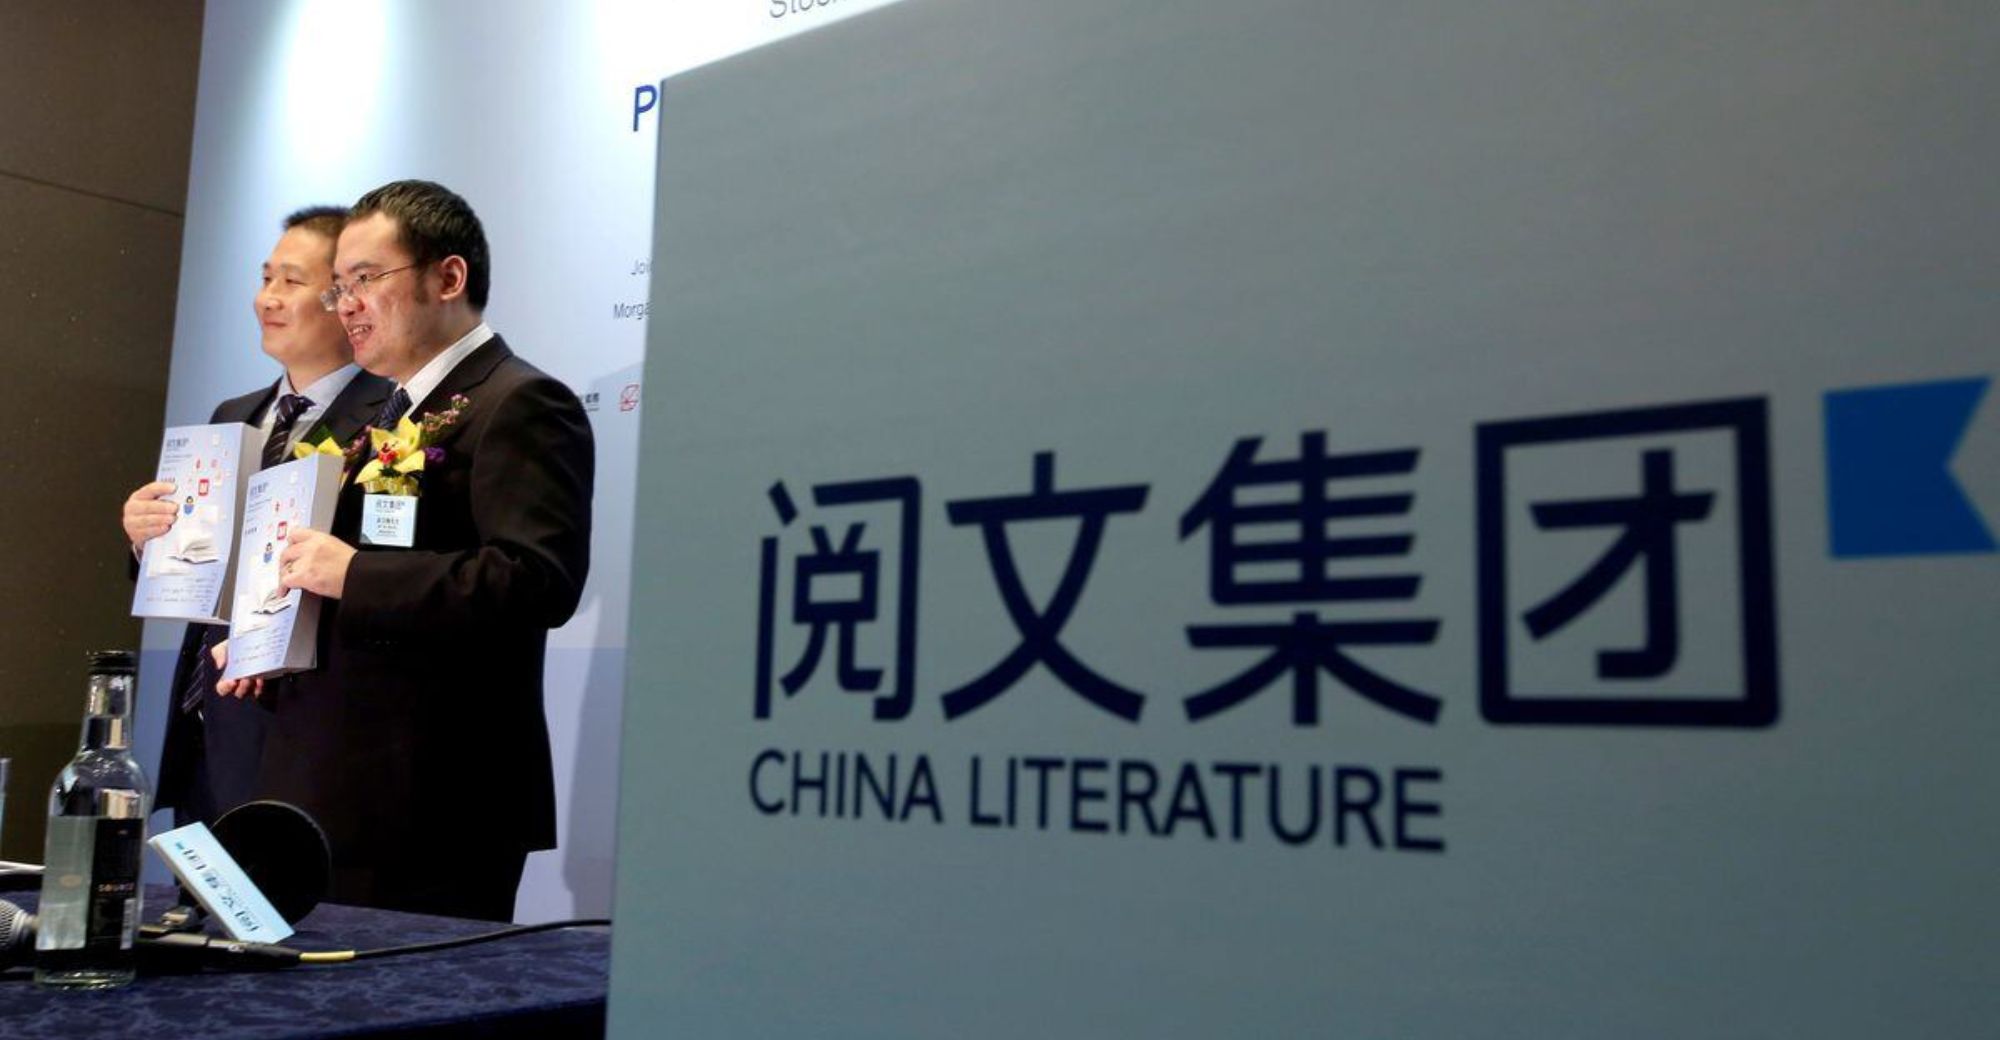 China Literature Plans to Acquire Tencent Animation and Comics’ Related Businesses and IP Assets